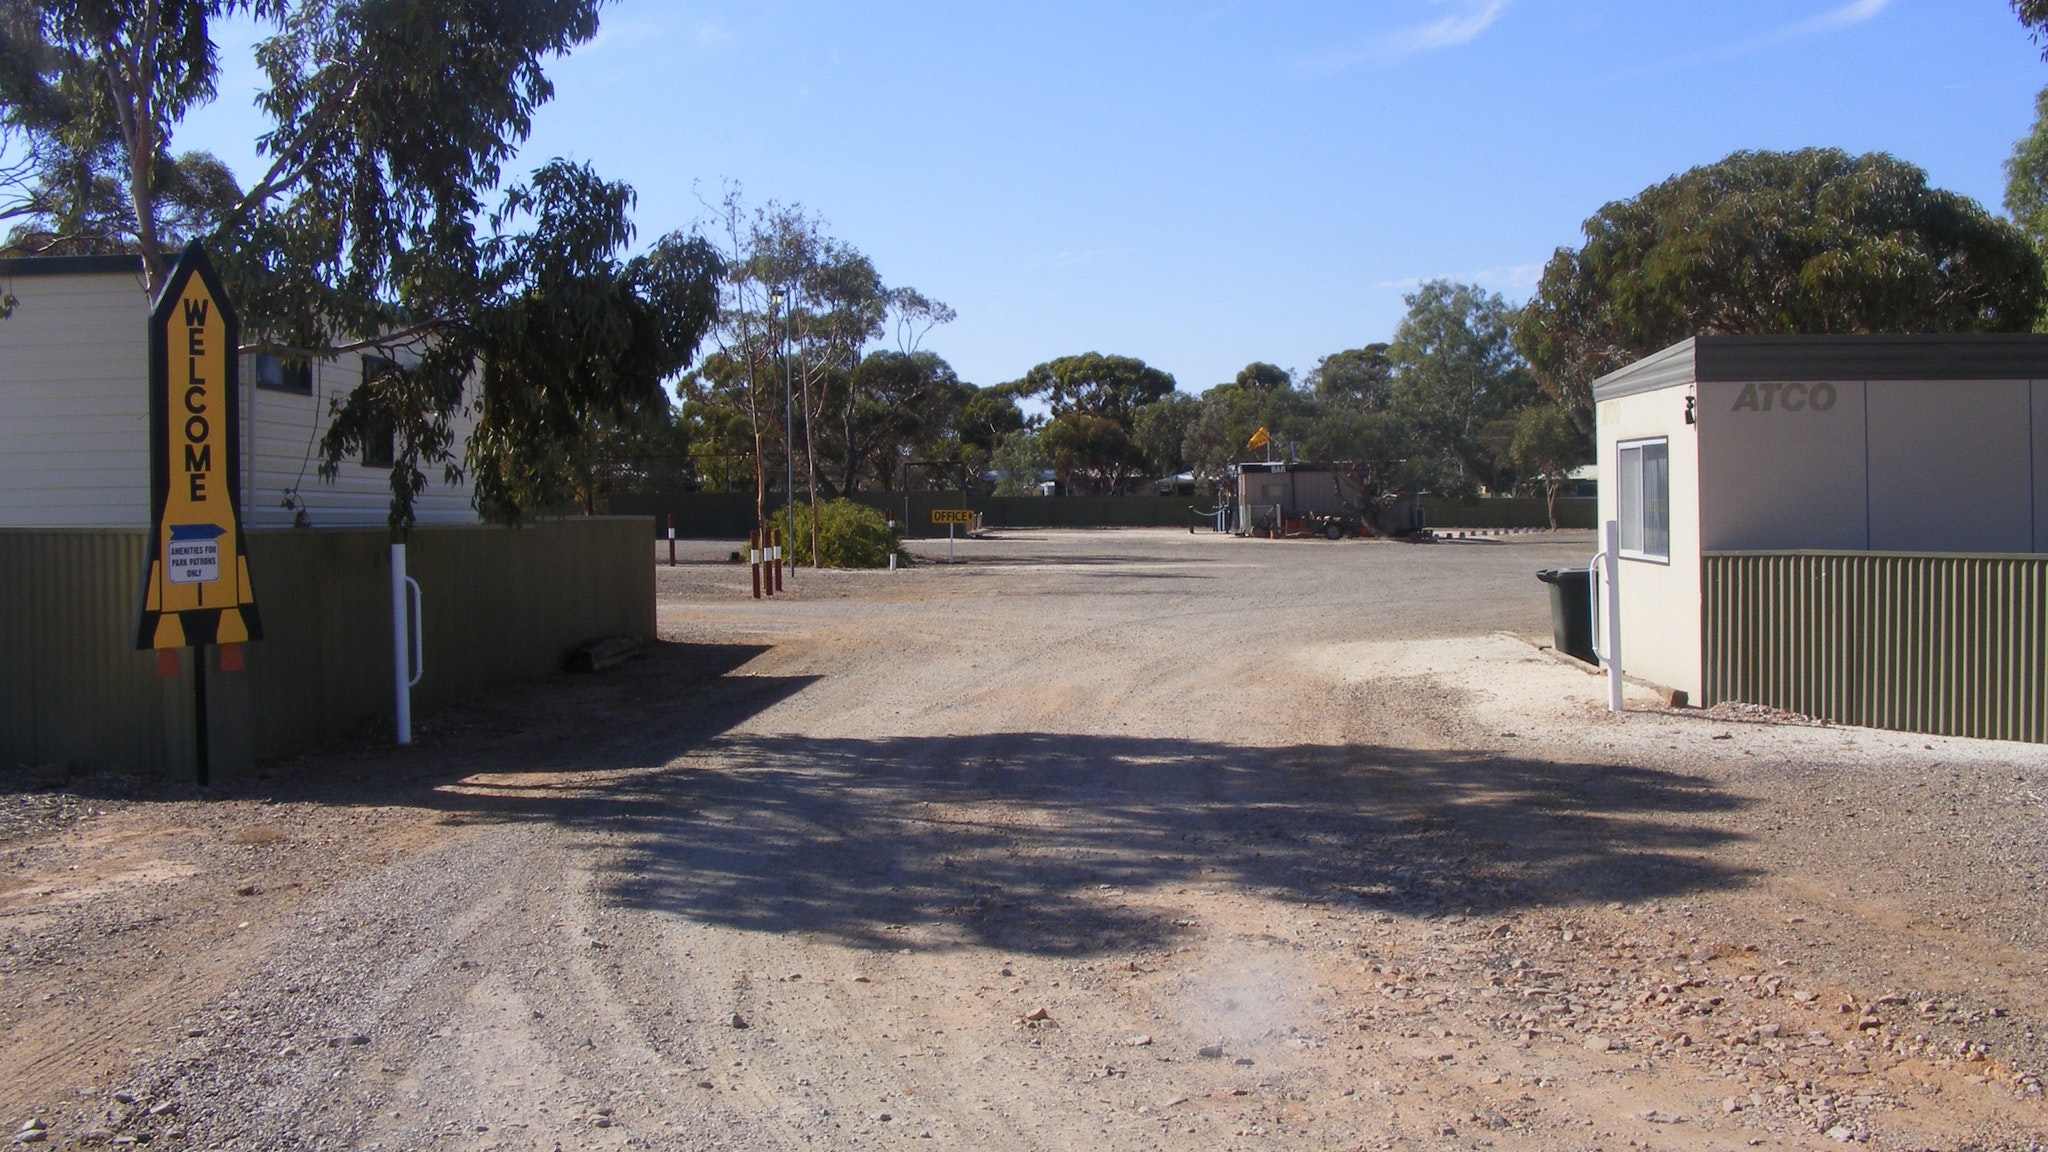 Woomera Traveller's Village and Caravan Park - New South Wales Tourism 